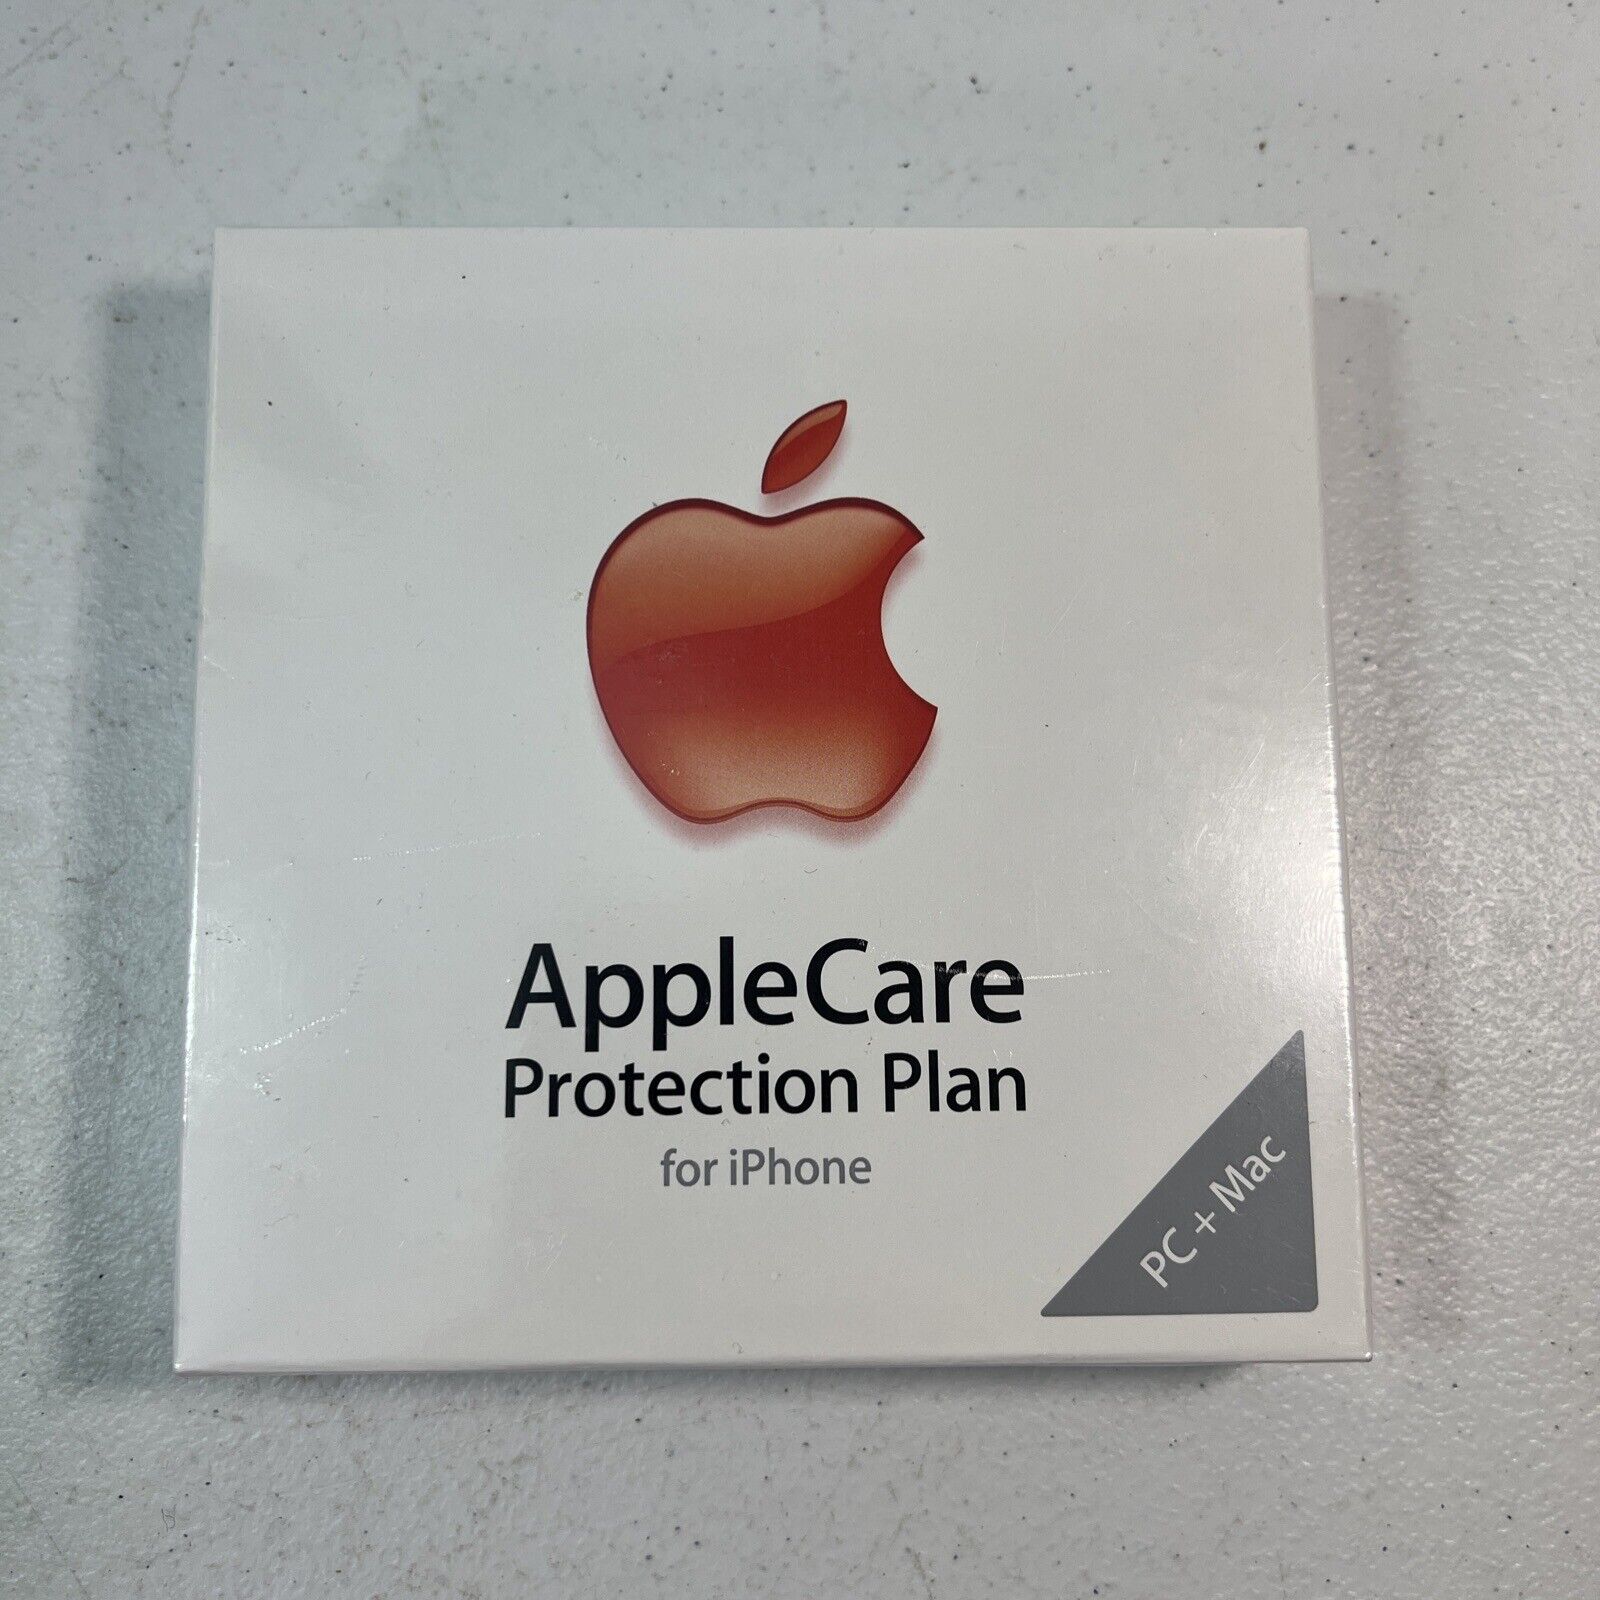 AppleCare Protection Plan for iPhone PC + Mac  Brand New Factory Sealed